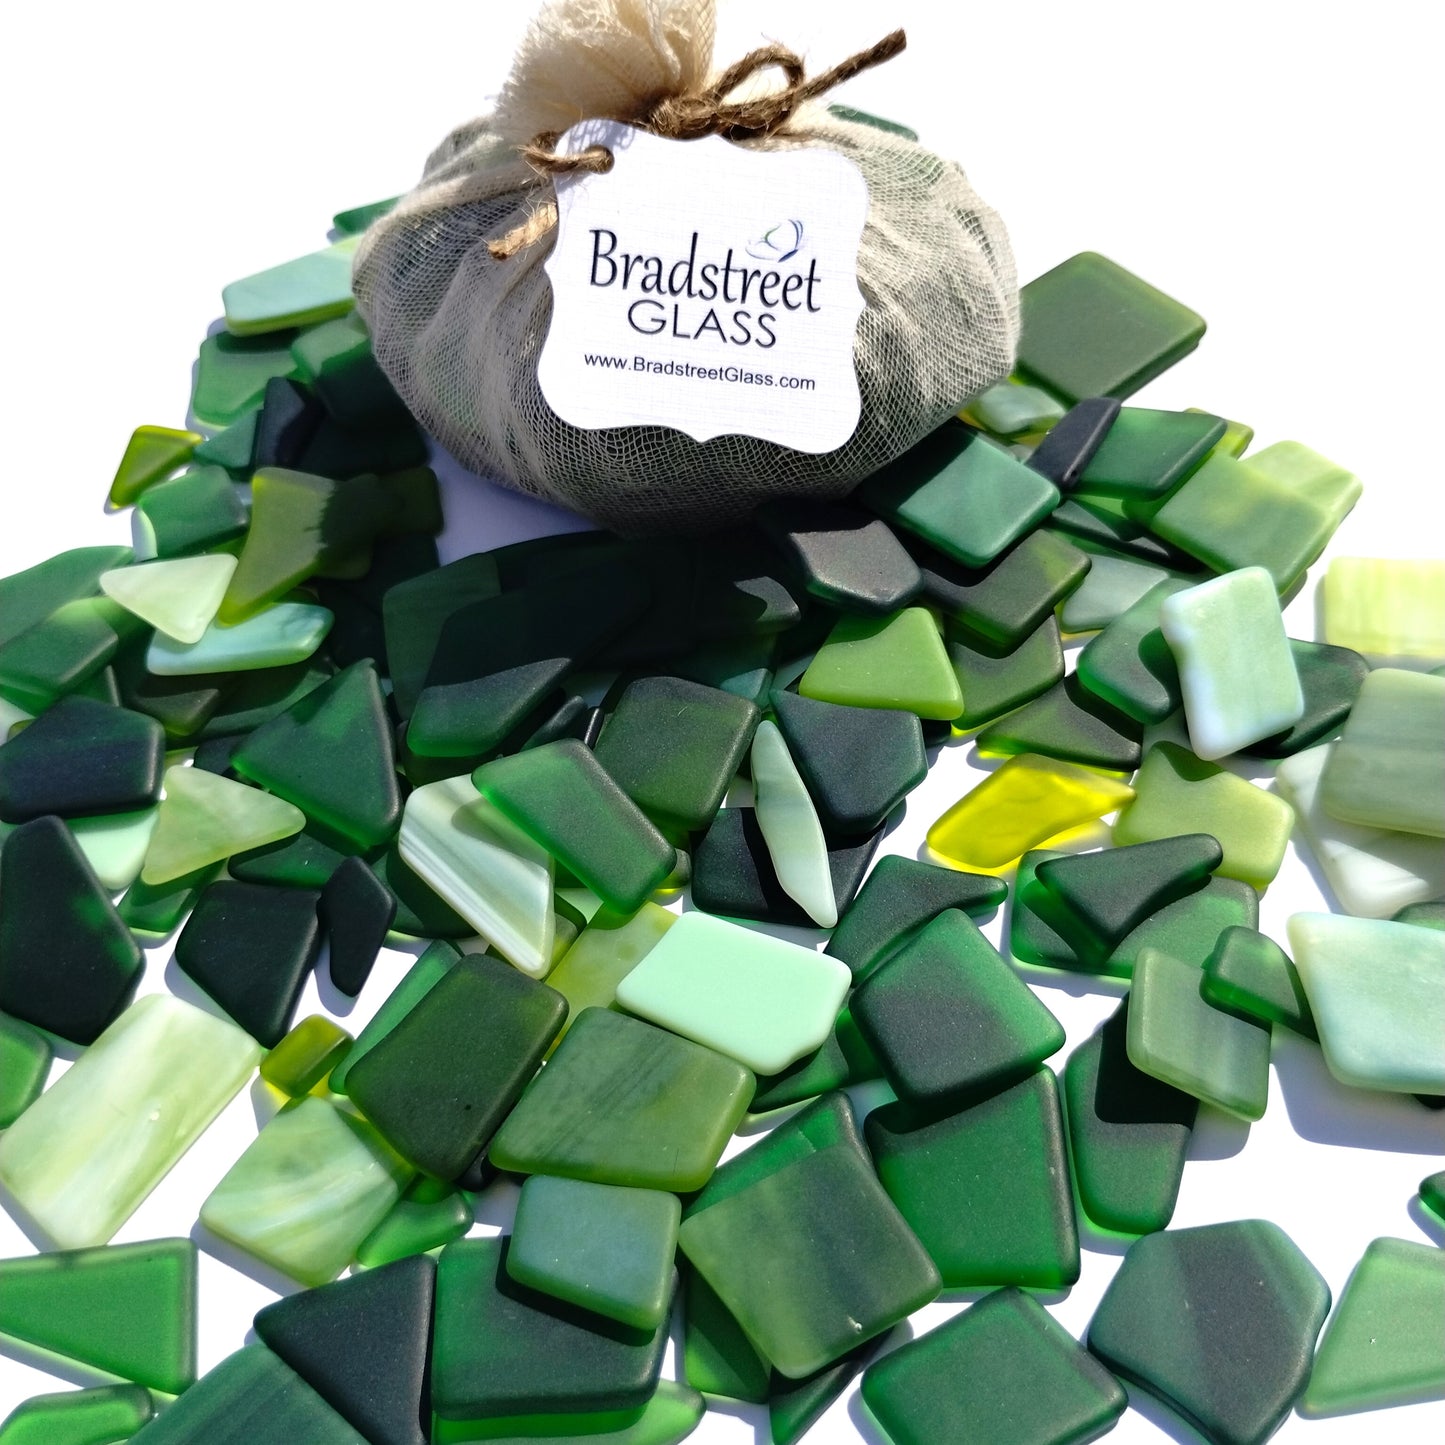 Bradstreet Glass Green Tumbled Stained Glass 1/2 LB "Sea Glass" Pieces in Shades of Green